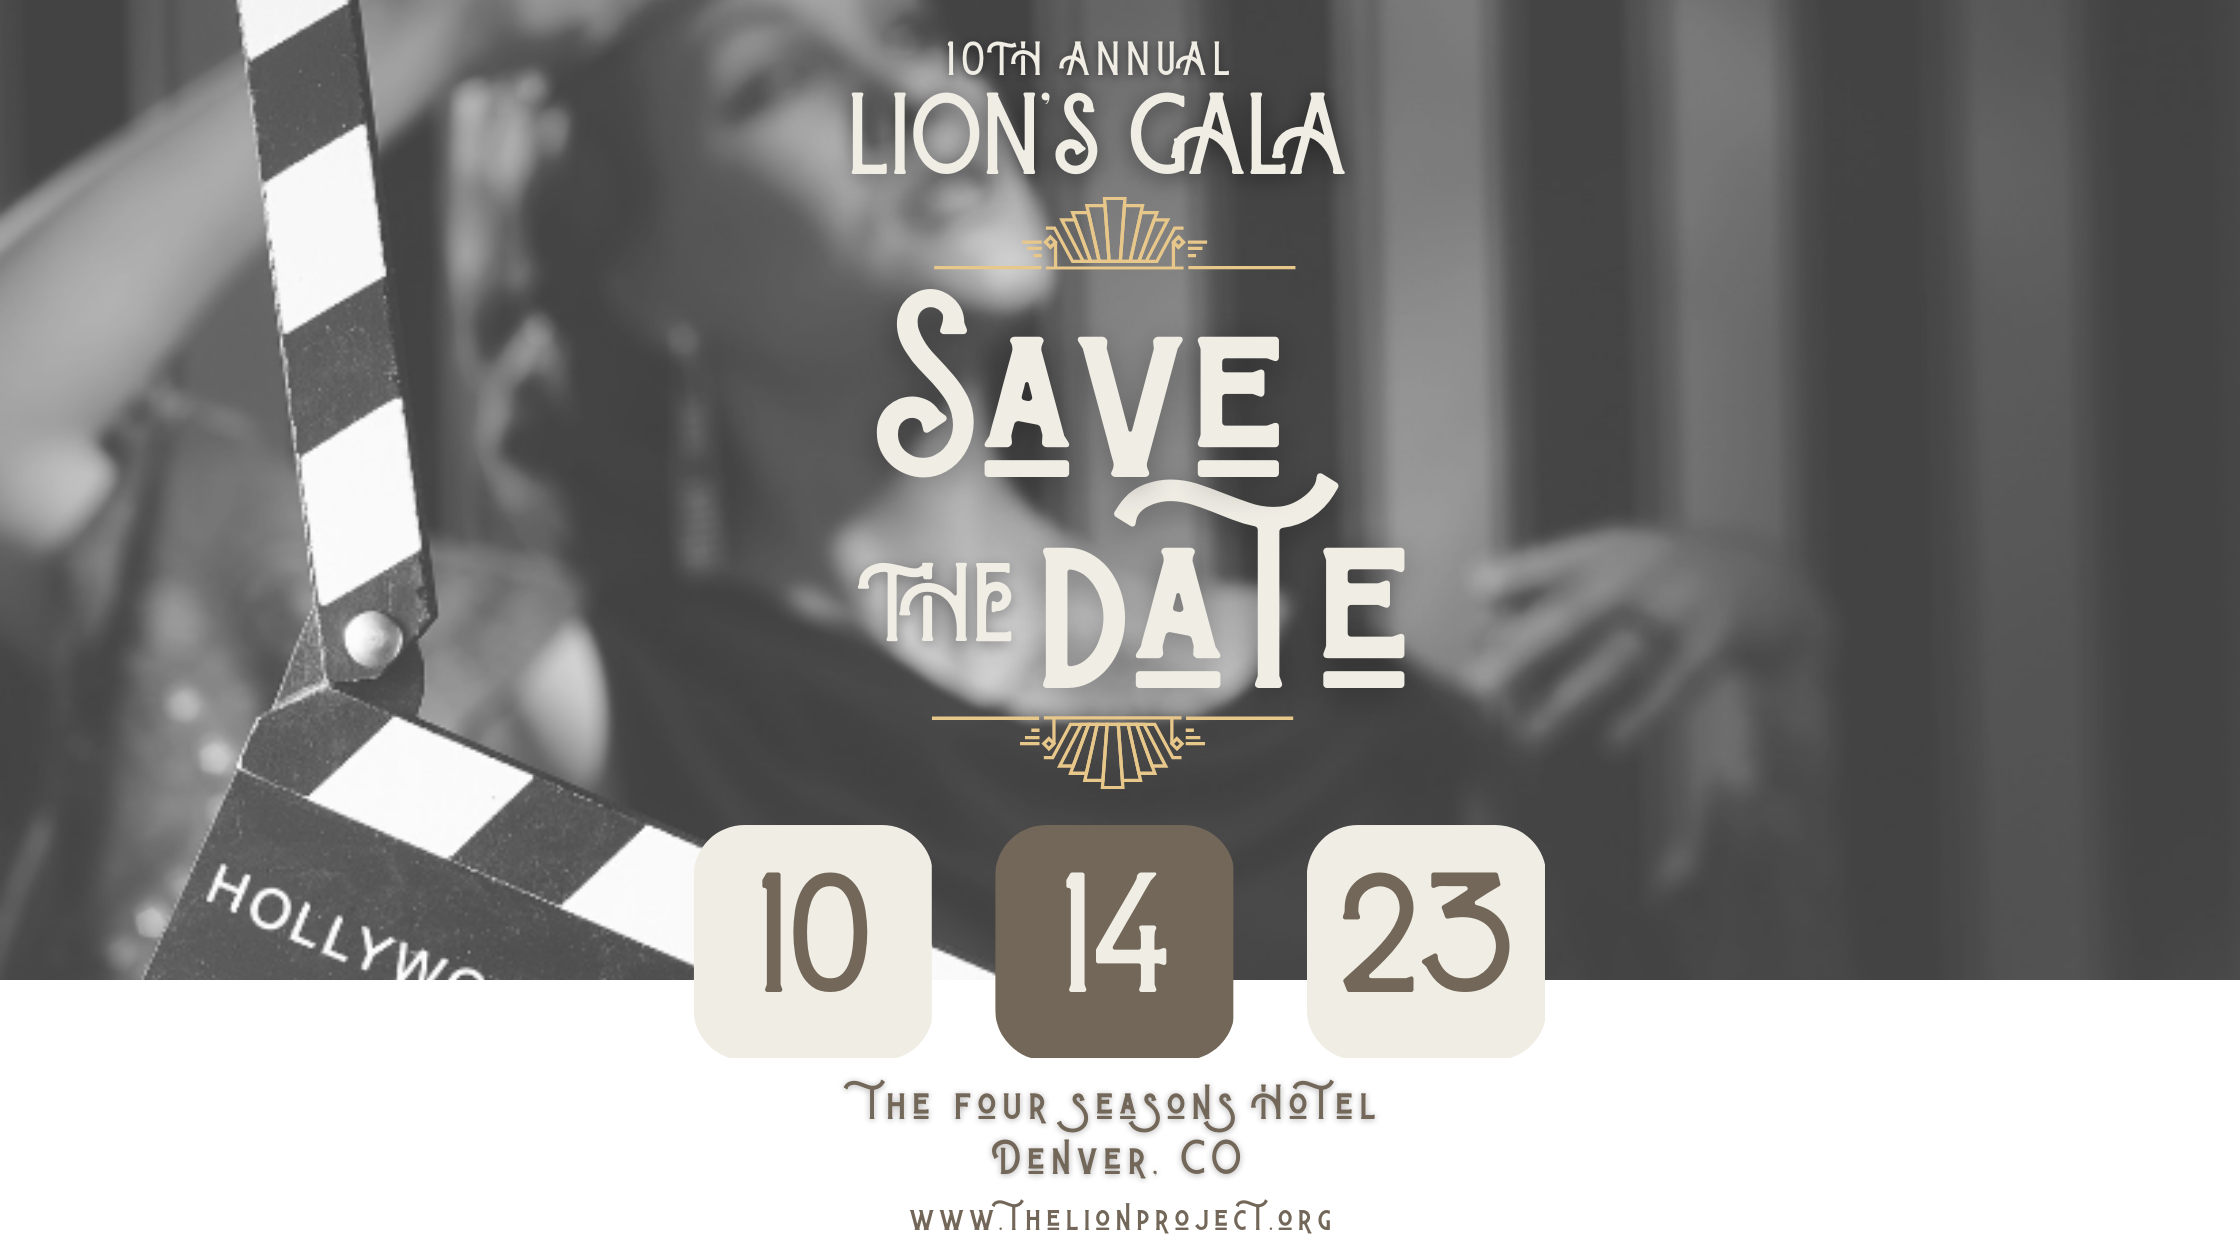 The Lion's Gala Save the Date